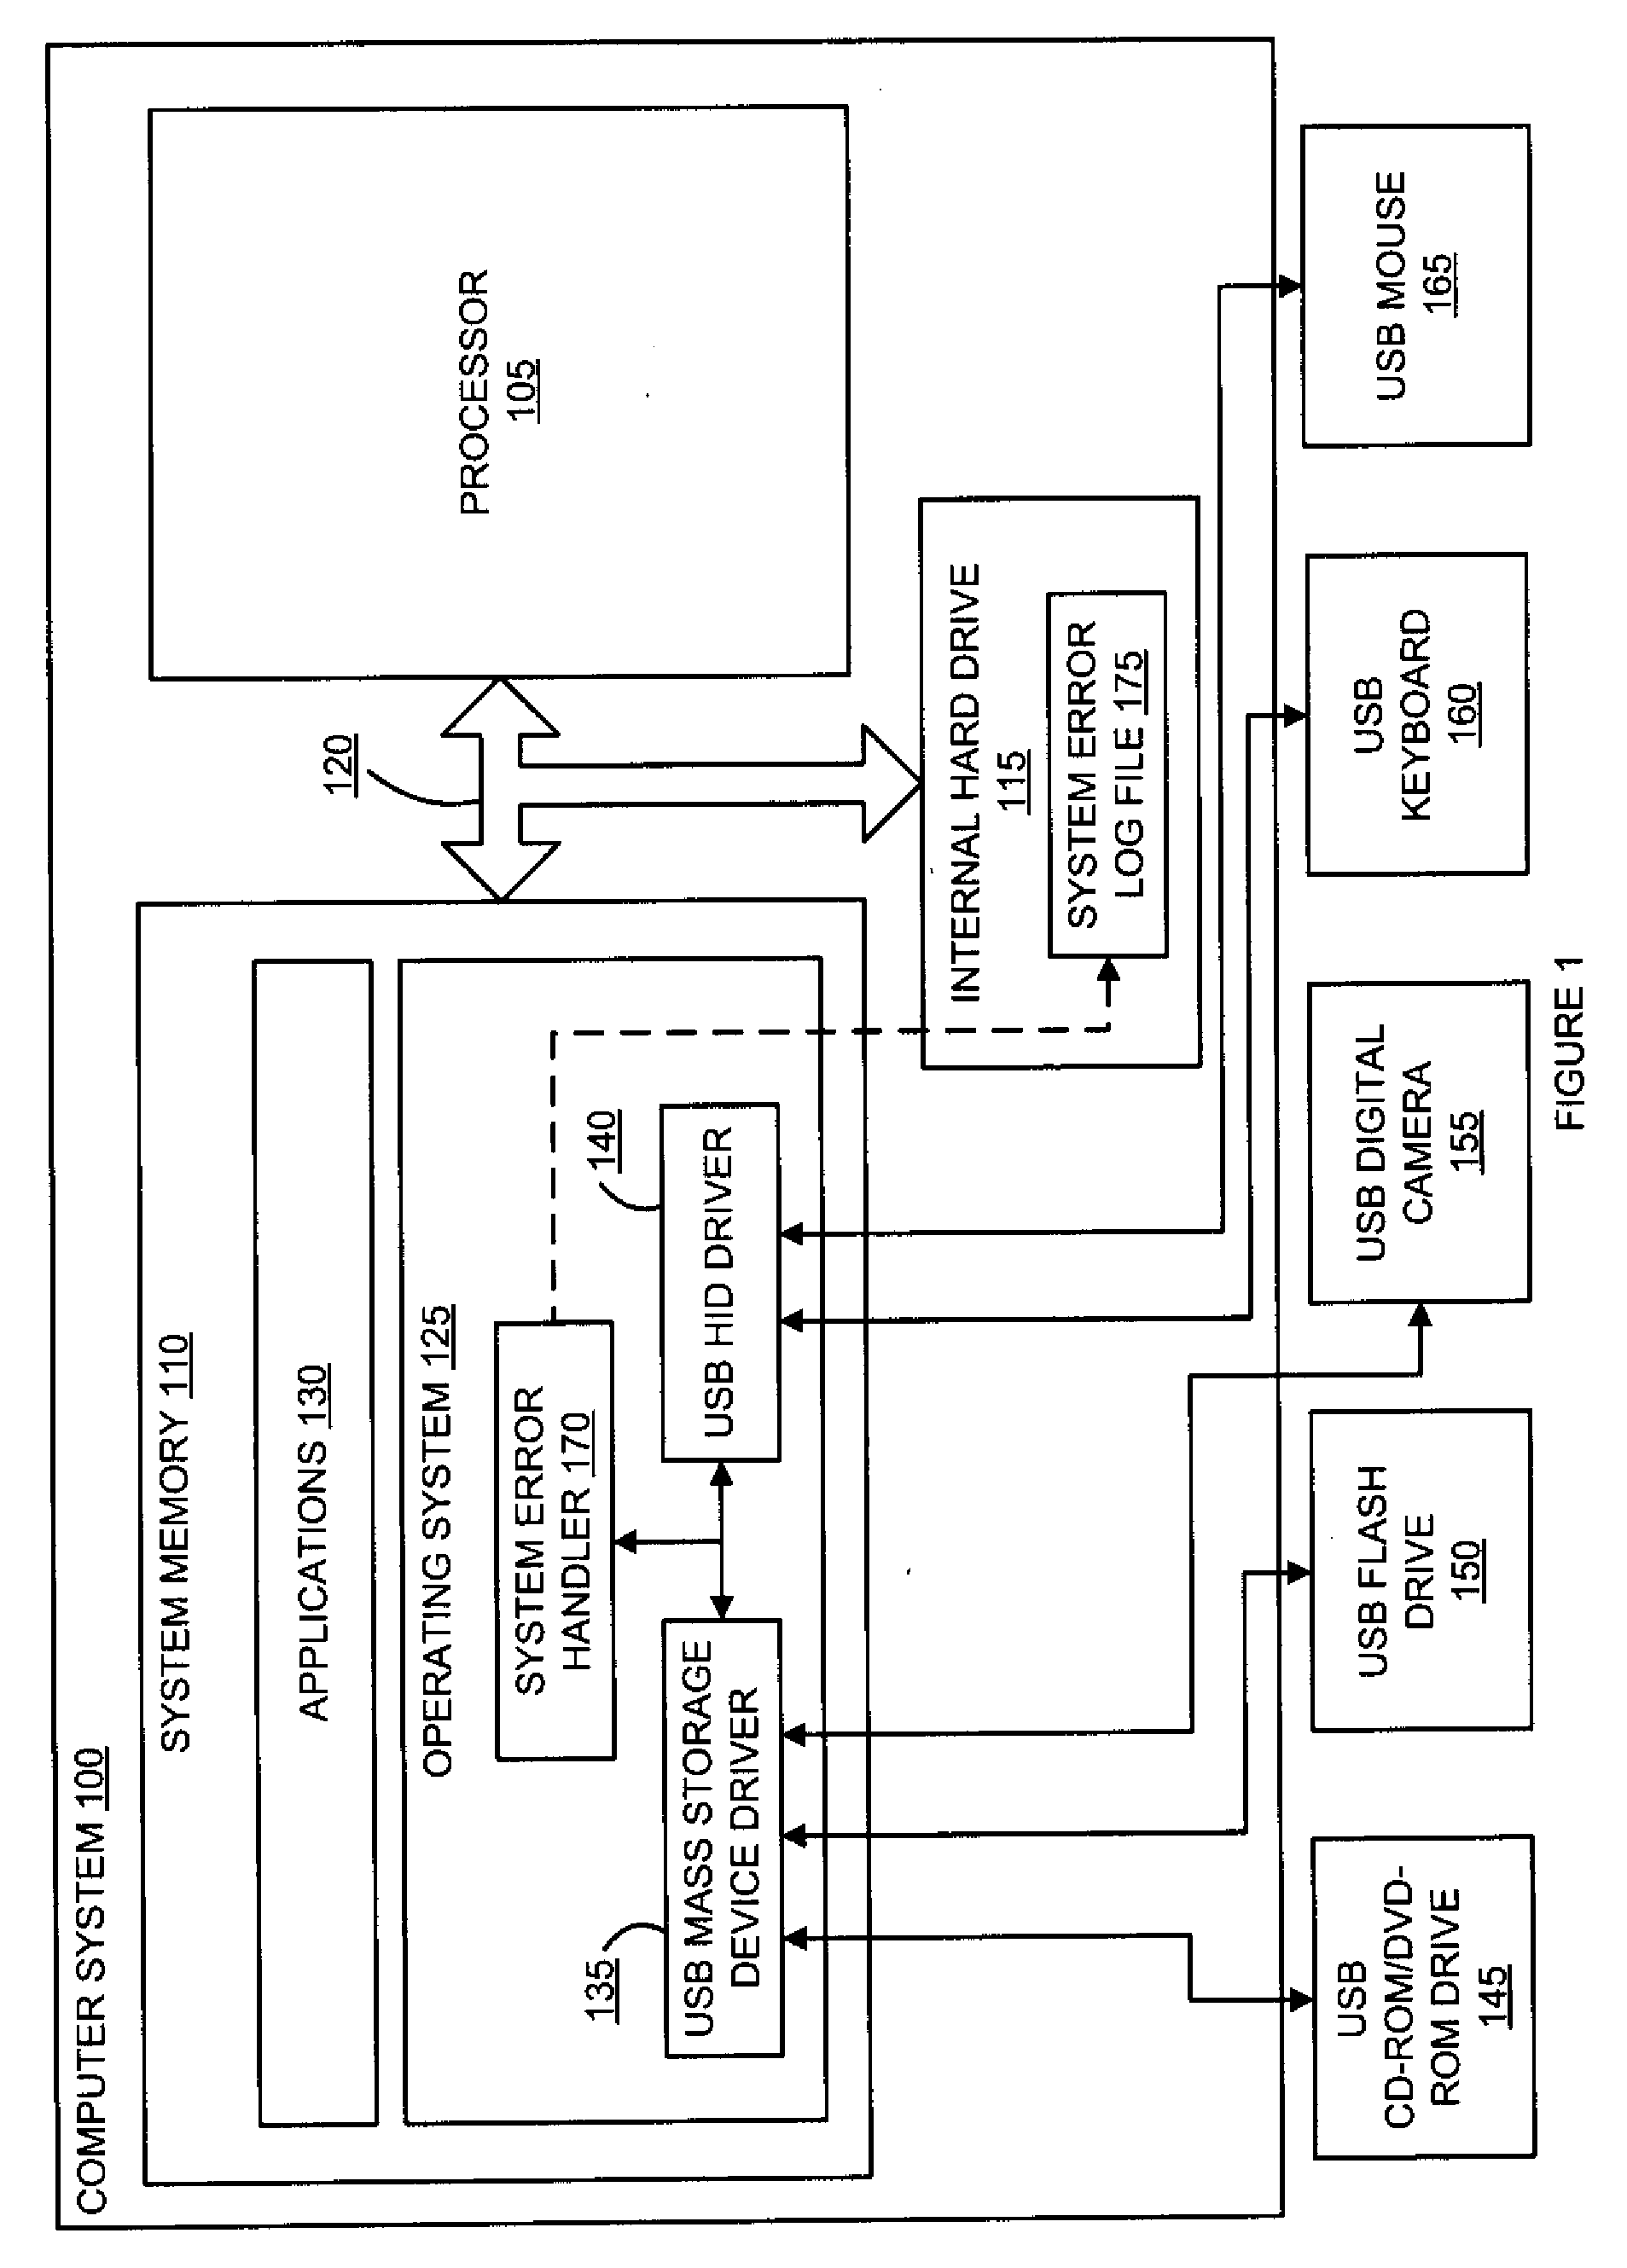 Method and System for Throttling Log Messages for Multiple Entities